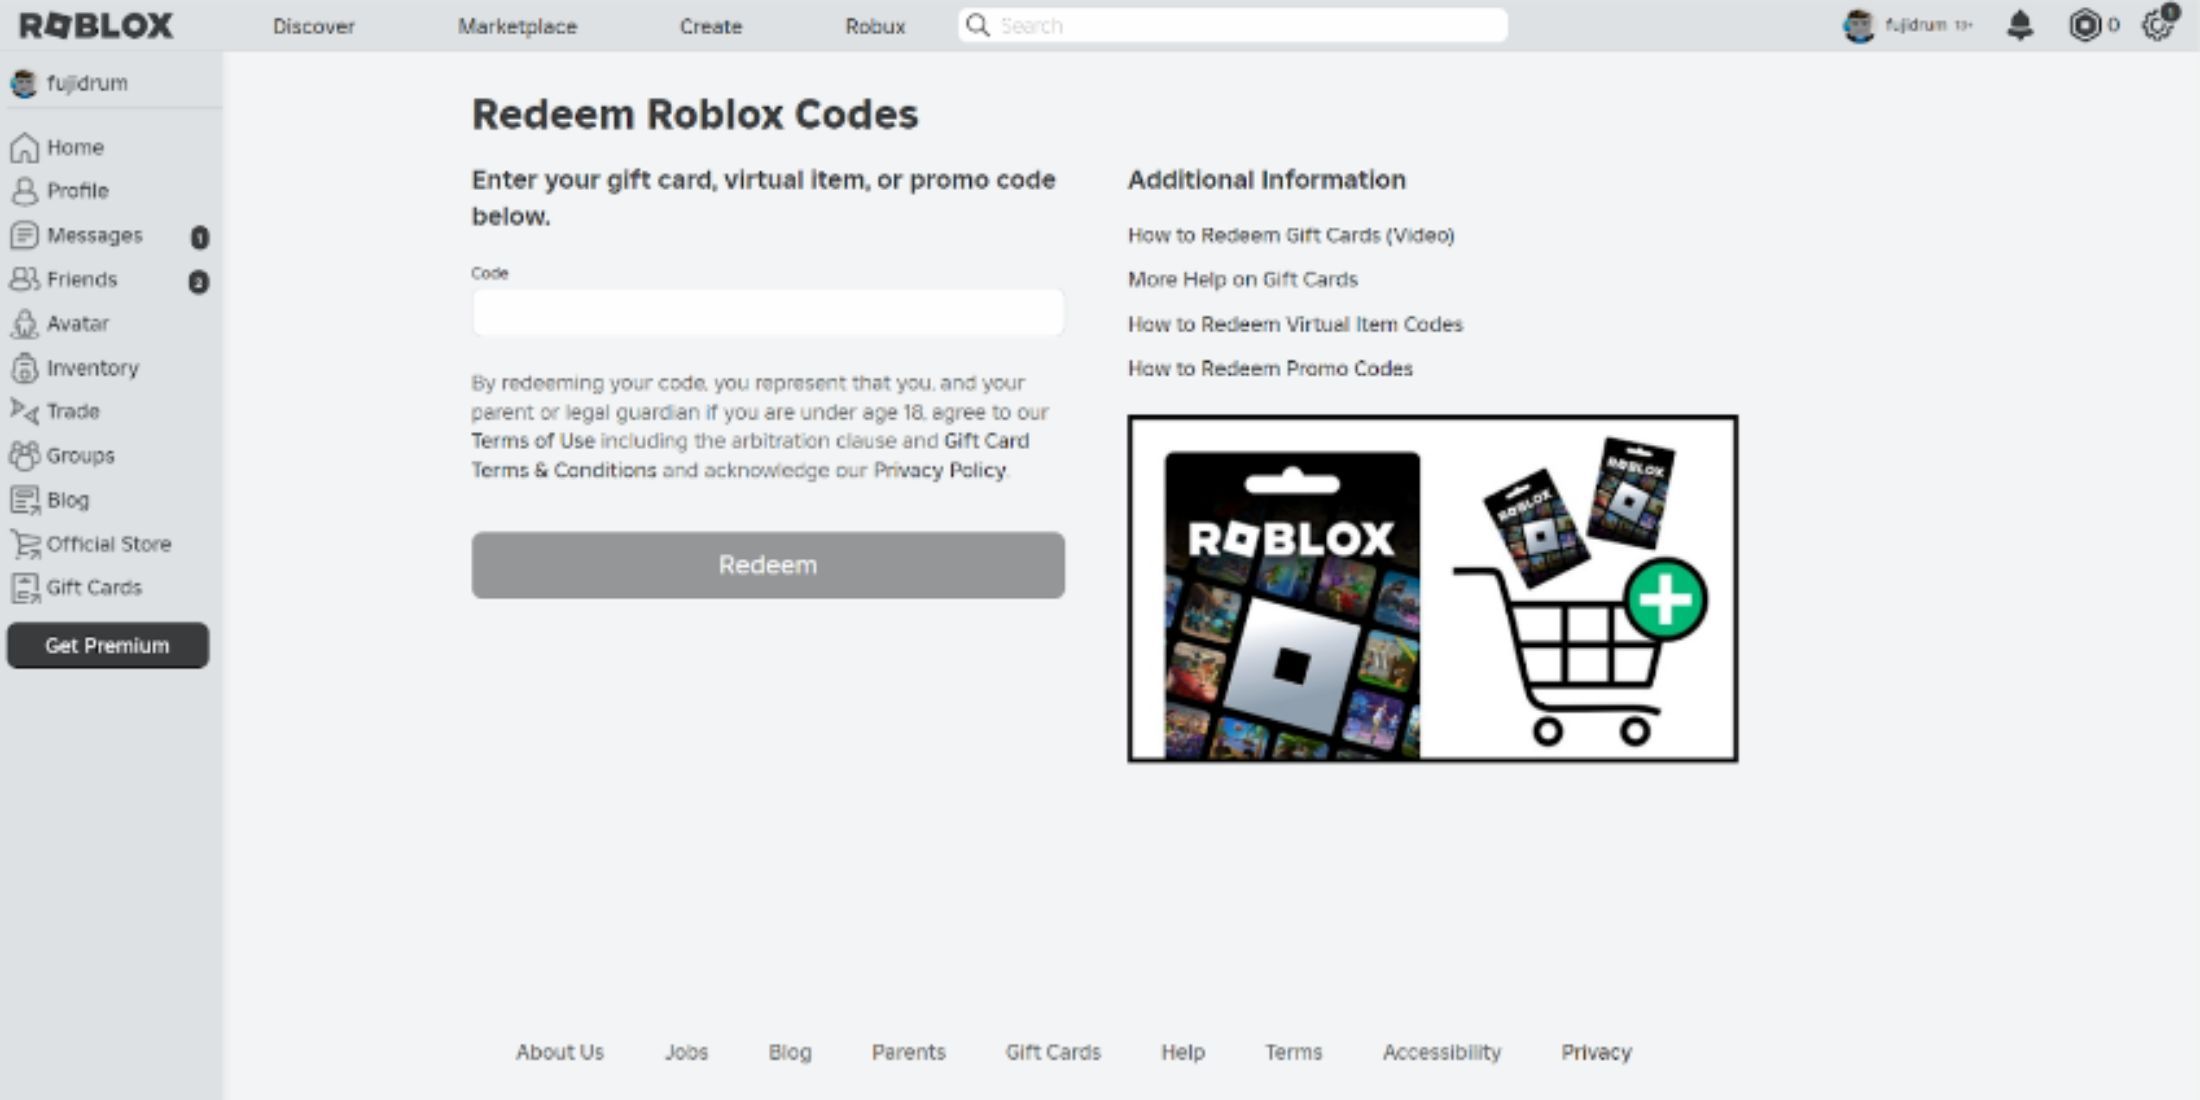 Roblox the codes tab